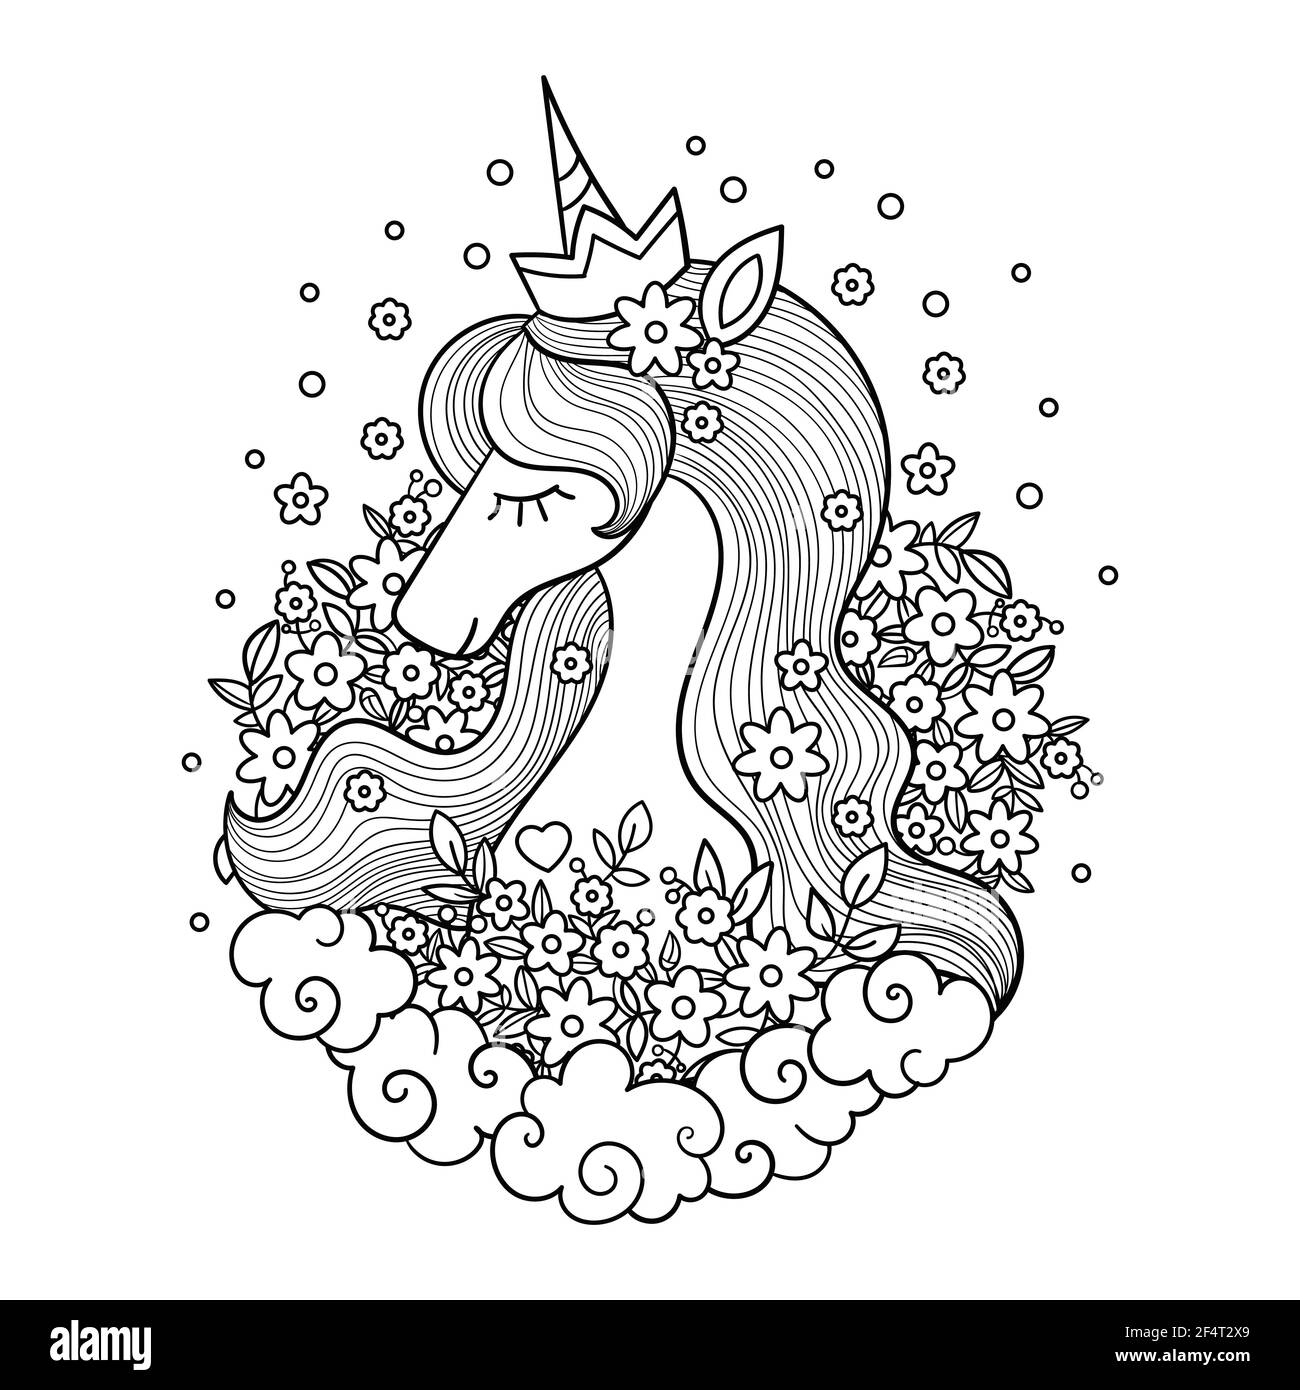 Head of a cute unicorn among flowers and clouds. Black and white linear illustration. Vector Stock Vector